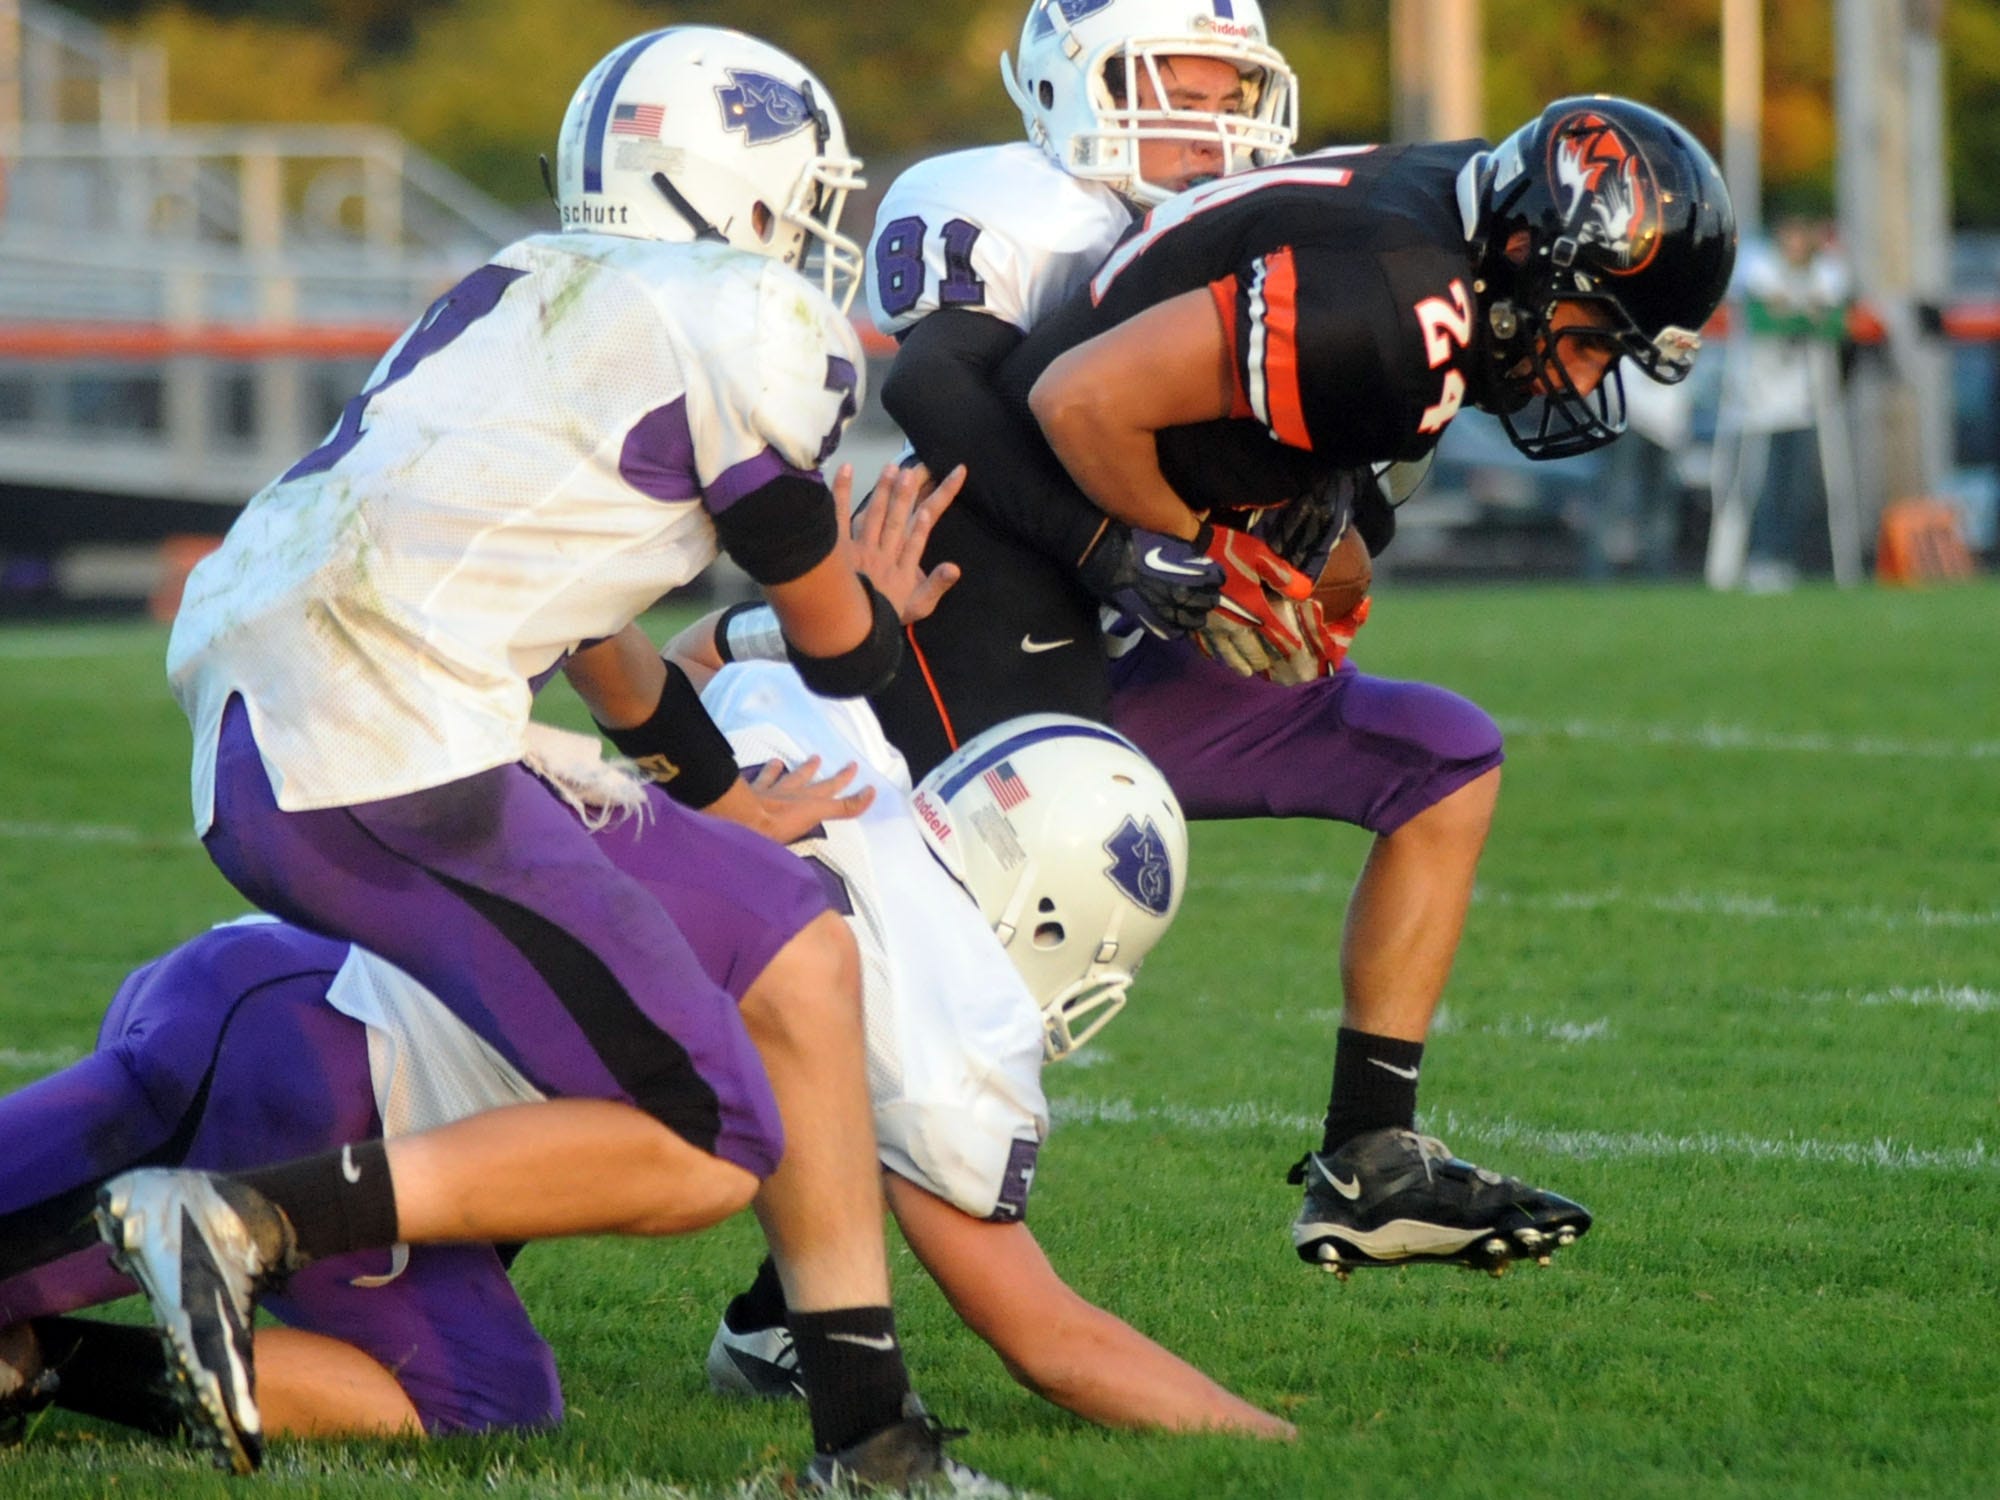 Mount Gilead’s Joseph Elson (81) and his teammates wrap up North Union’s Daniel Barr during last year’s game at North Union High School.